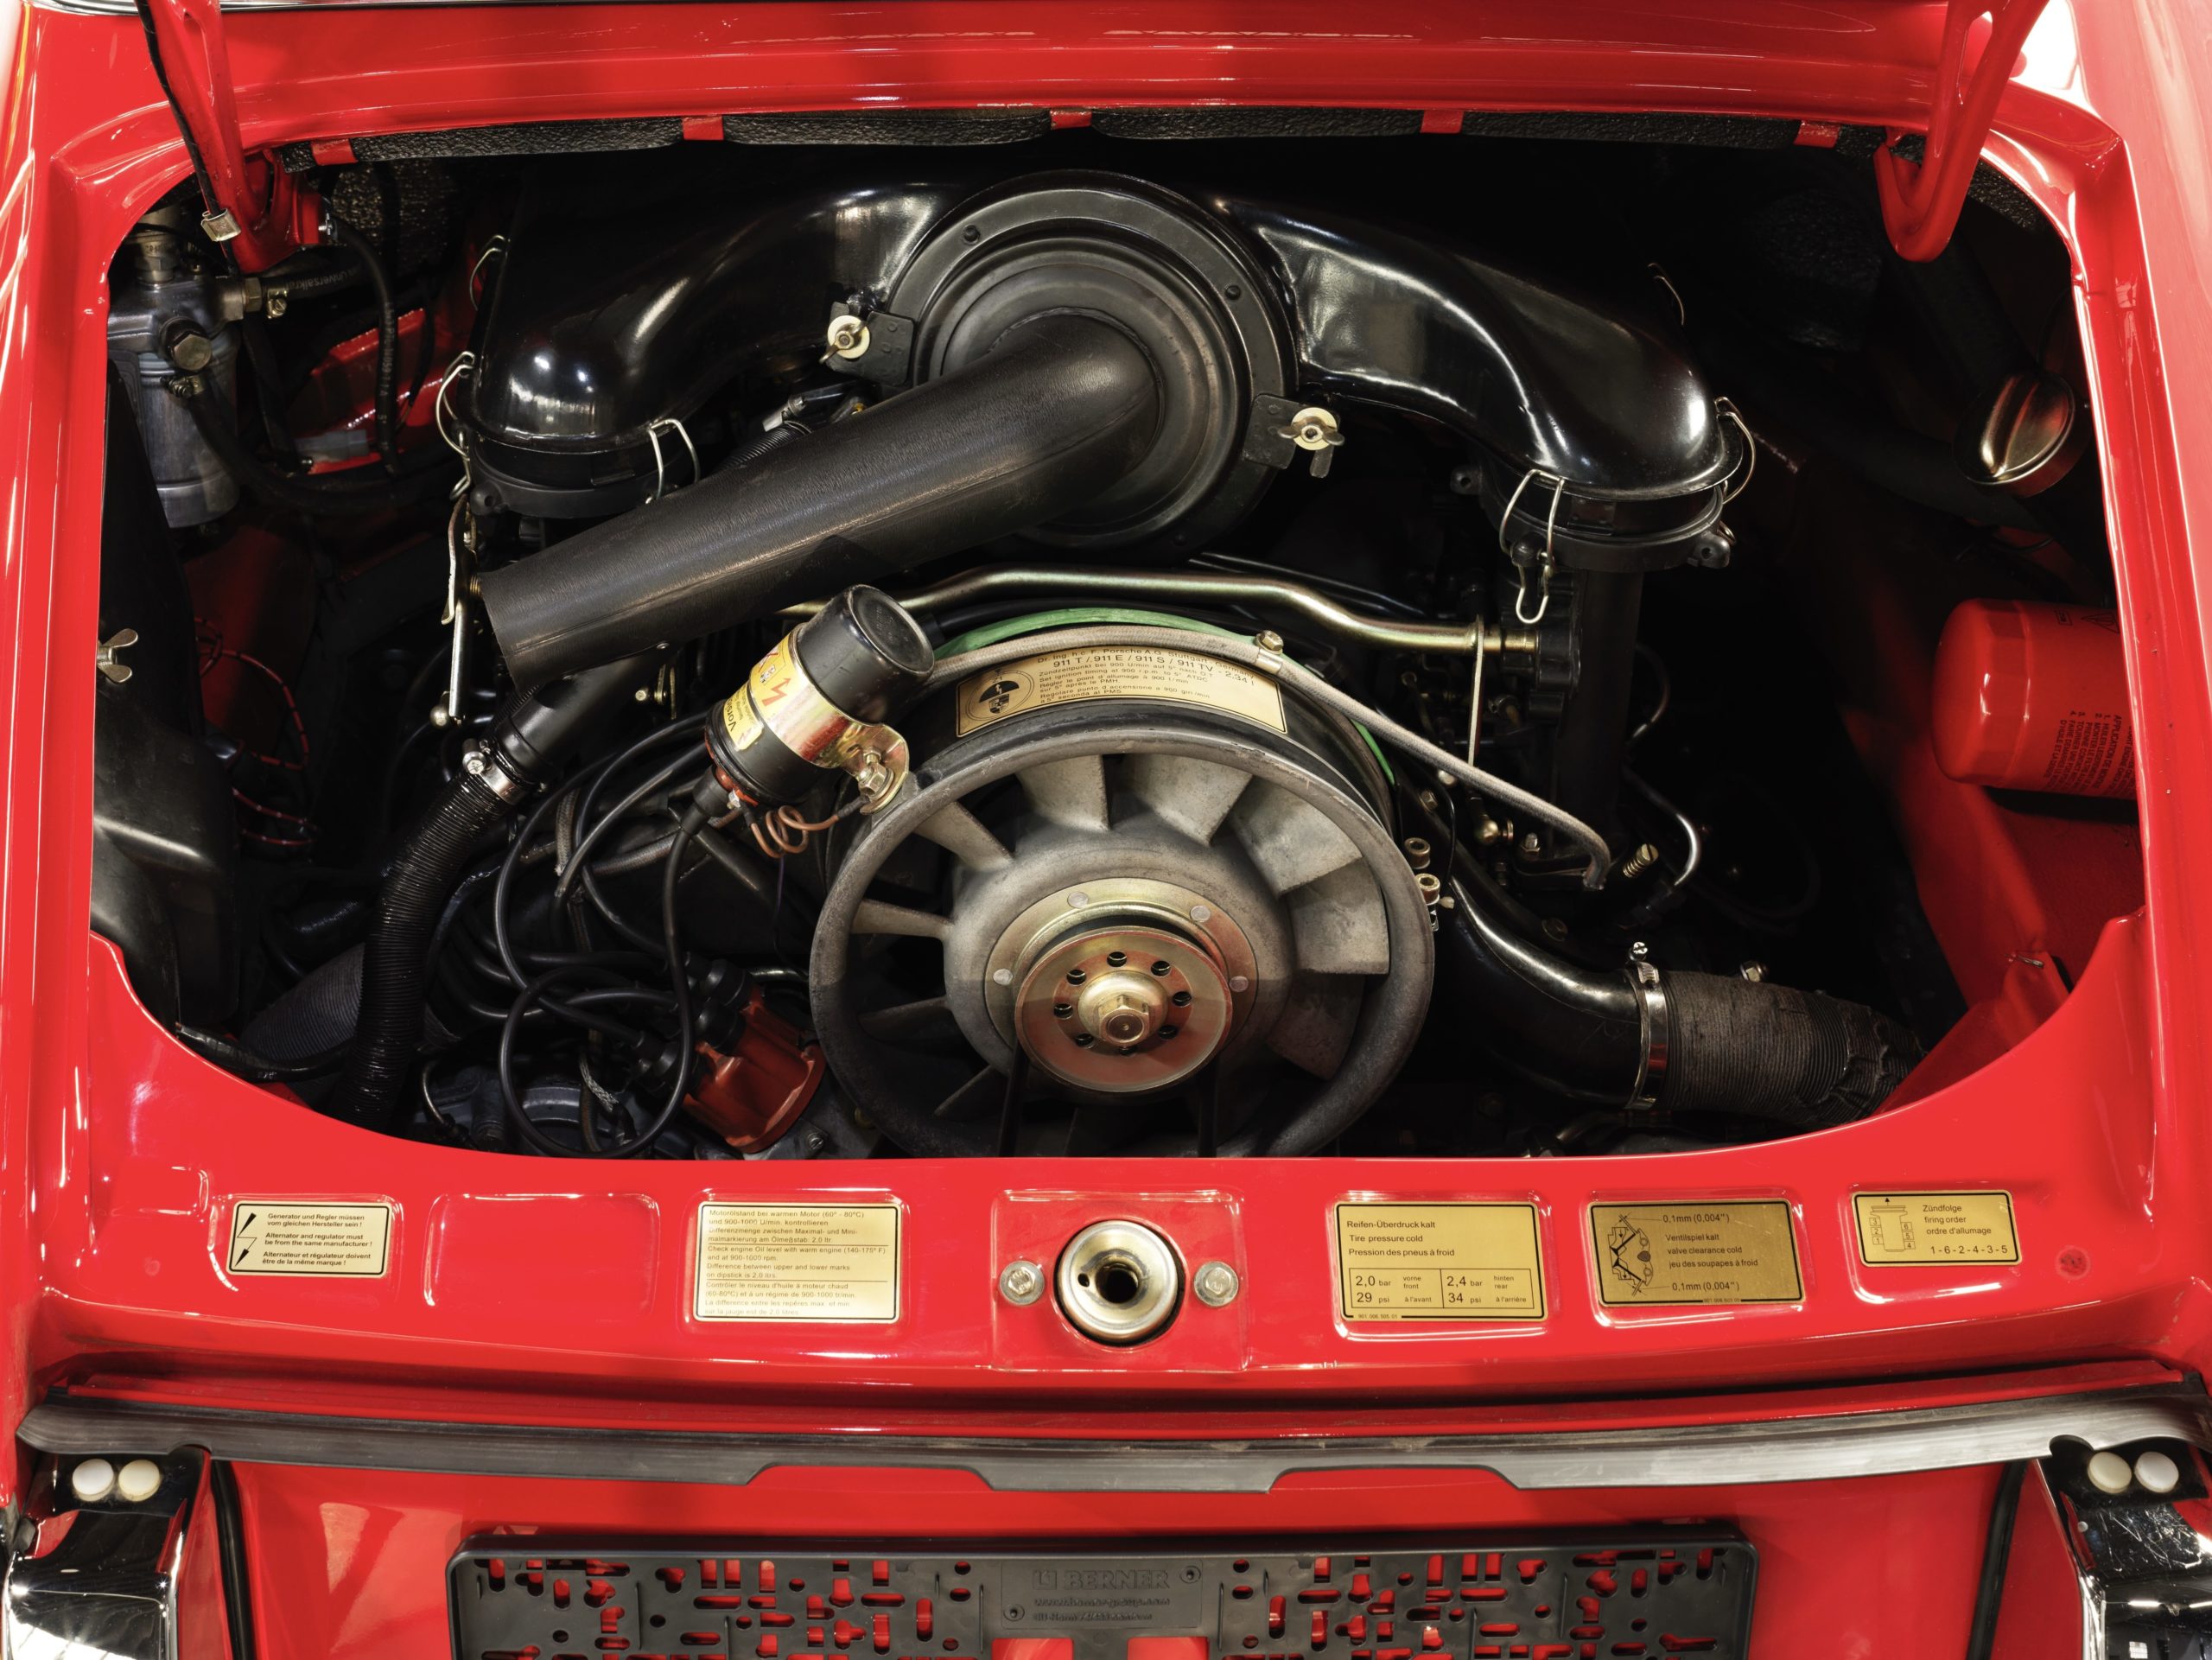 engine of a 1973 Red Bahia Porsche 911 2.4E Targa fully restored in 2019 with 12.685 km and black leather interior